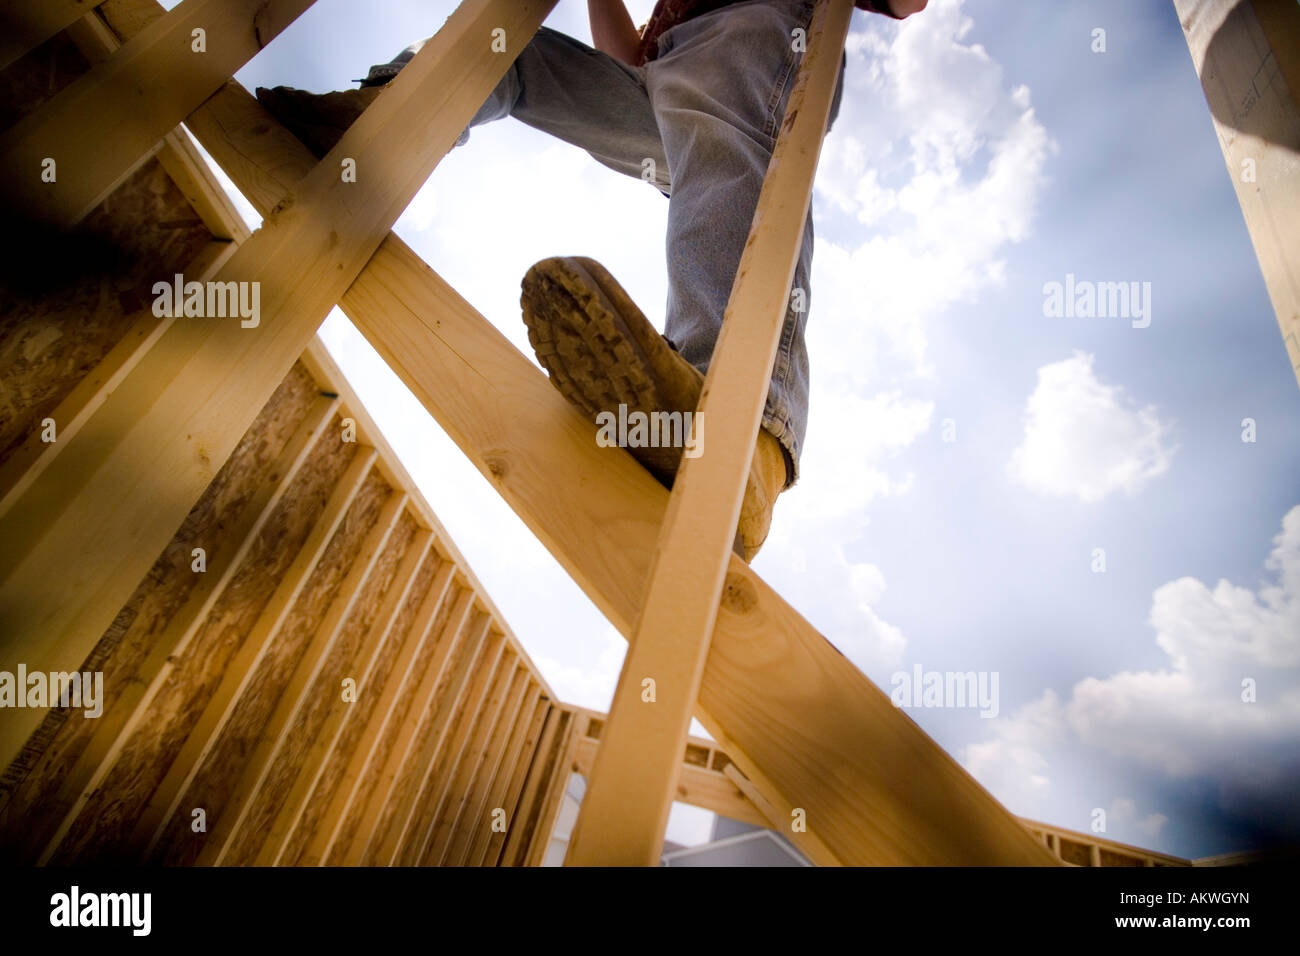 Construction worker working on wood frames house Stock Photo